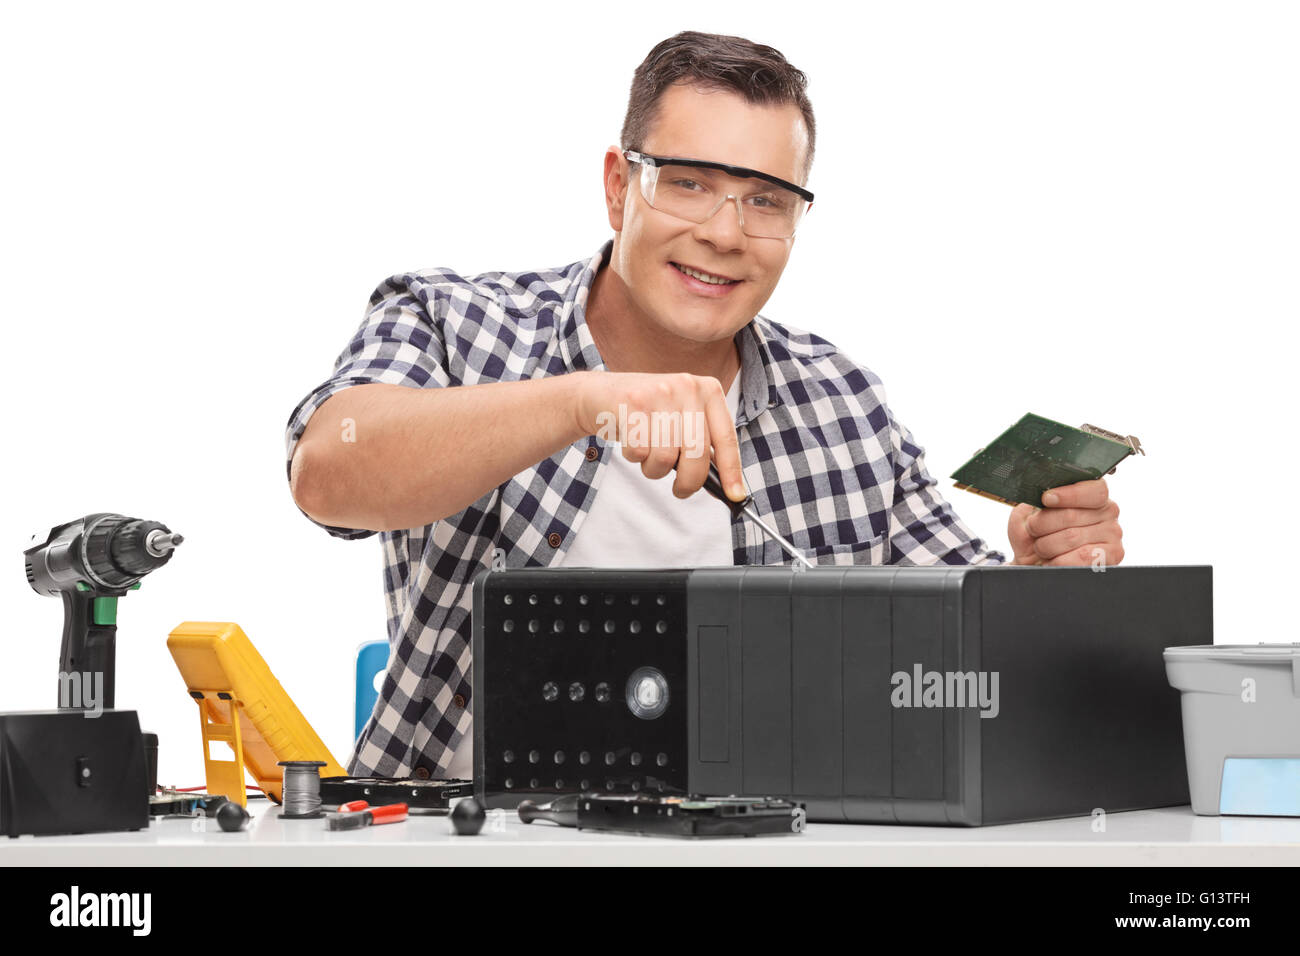 Young PC repairman fixing a broken desktop computer isolated on white background Stock Photo